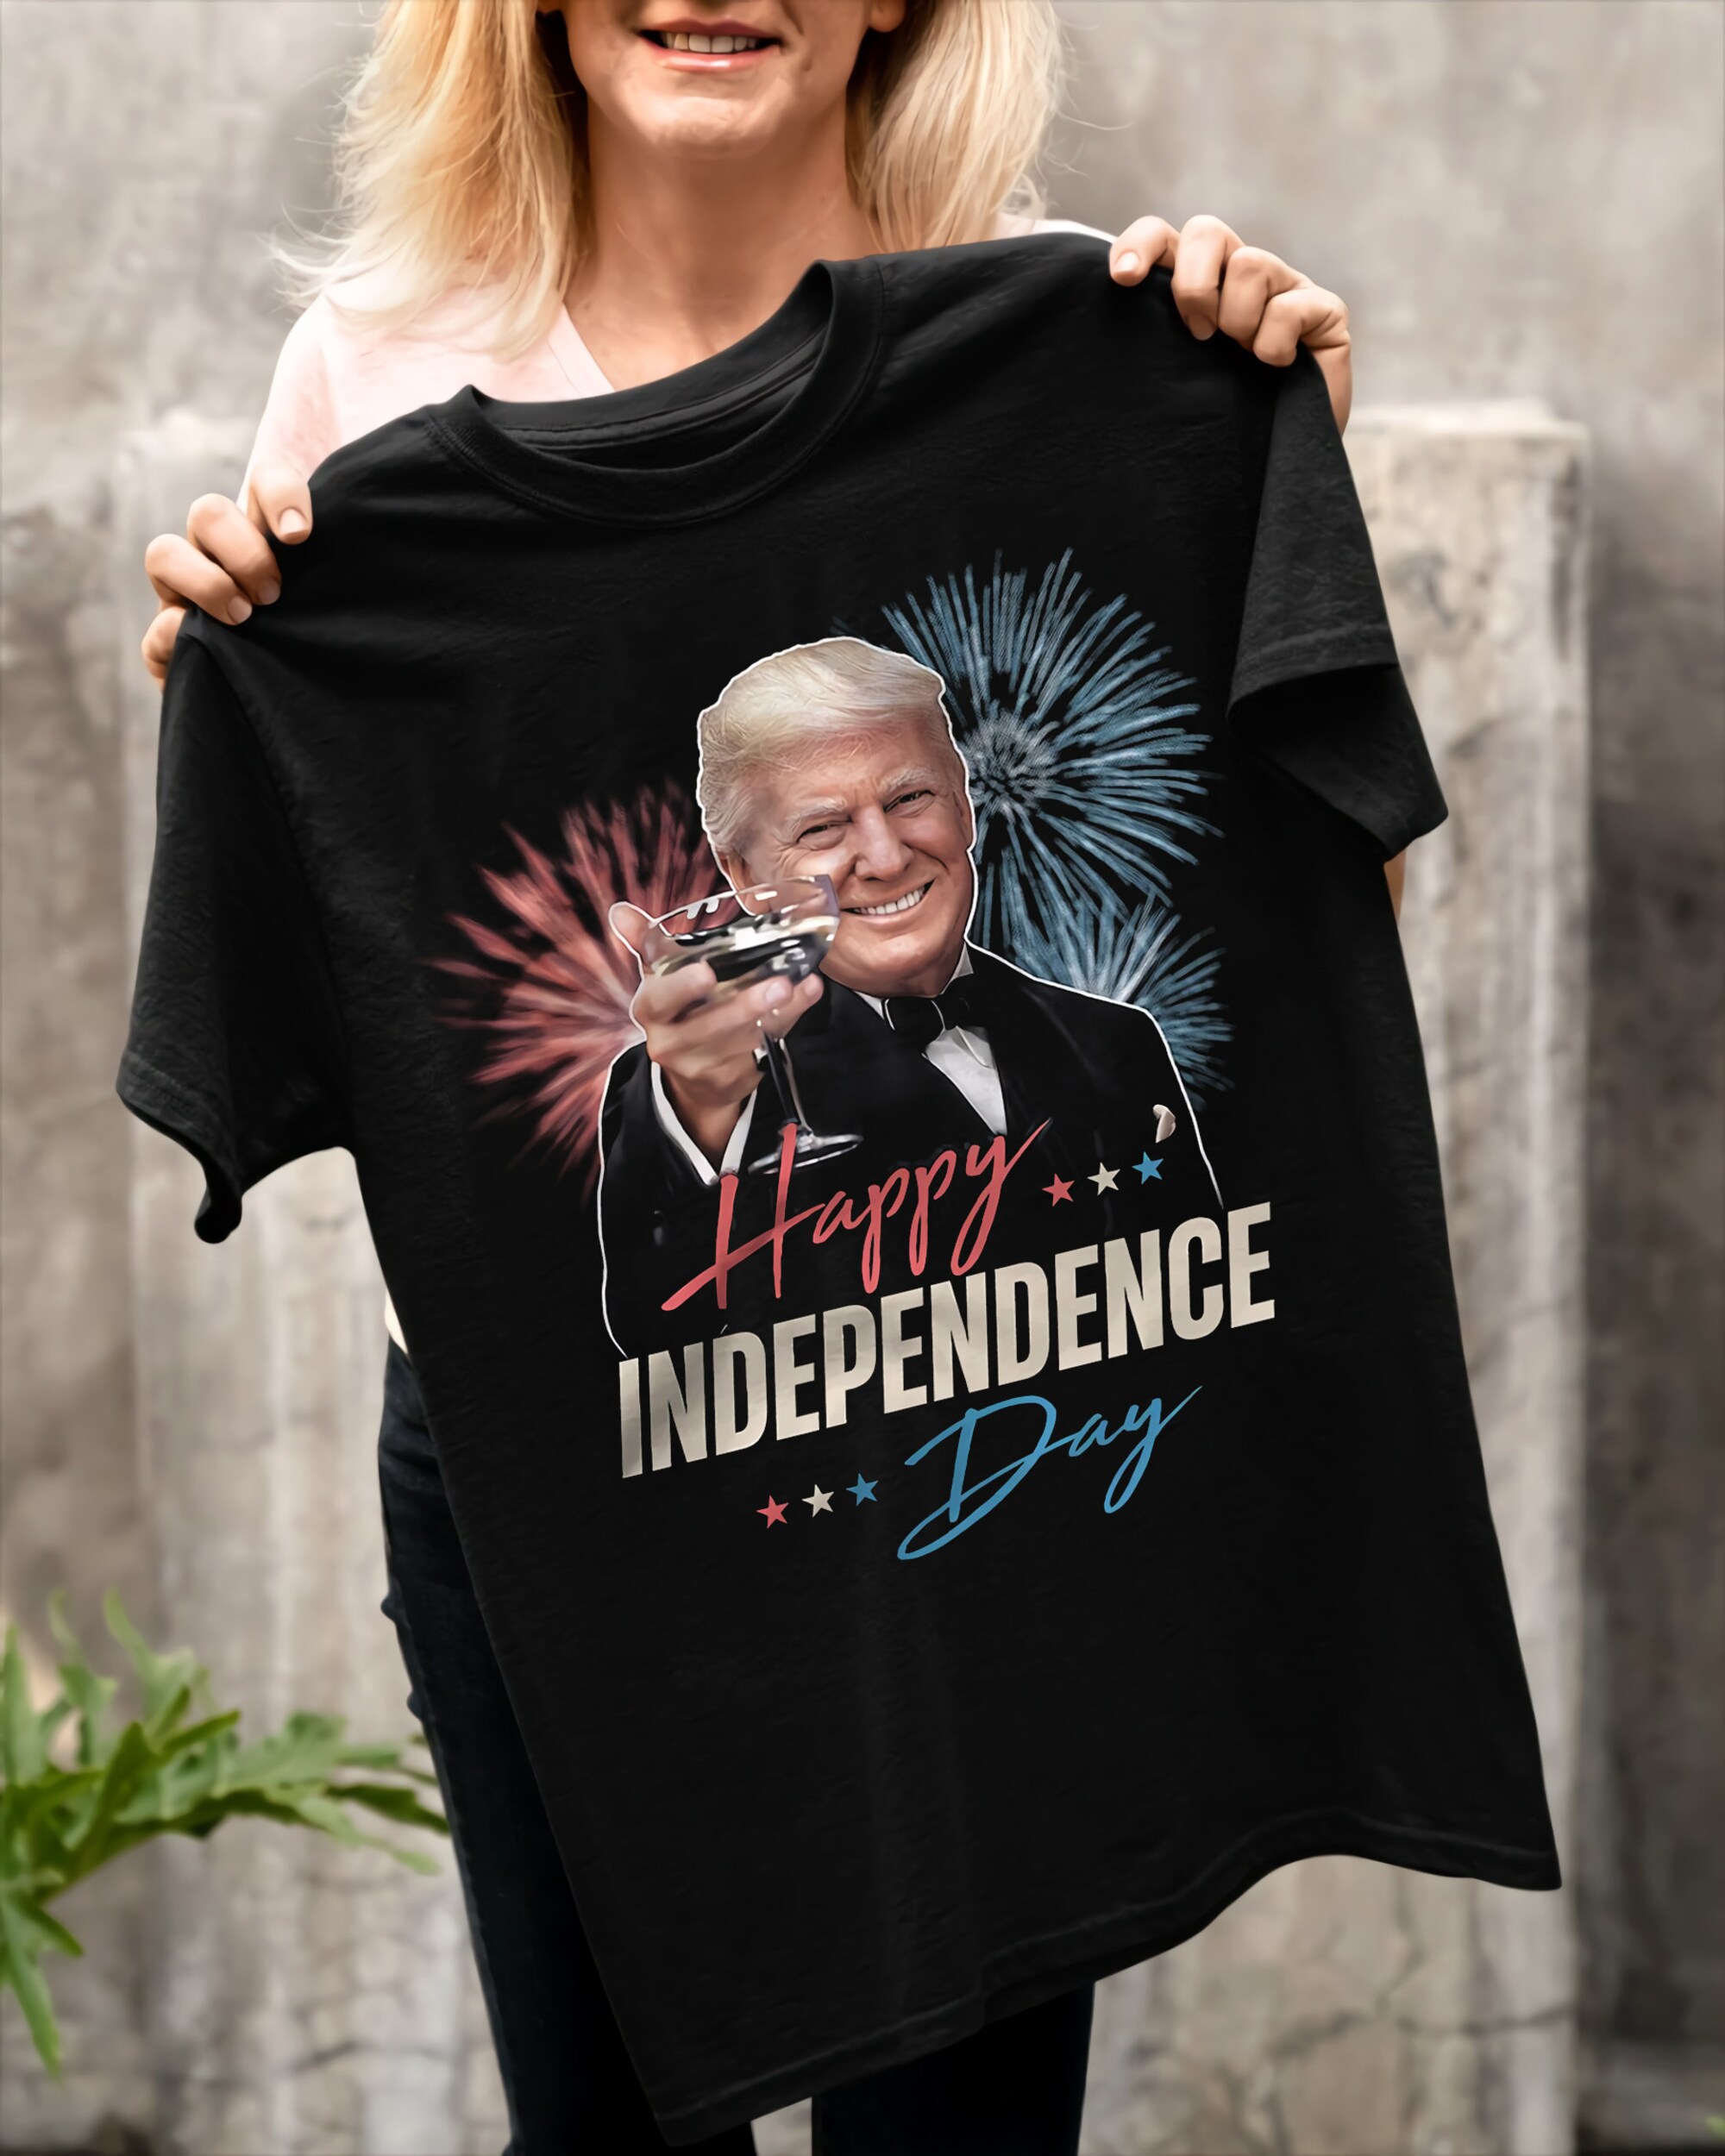 Discover happy independence day